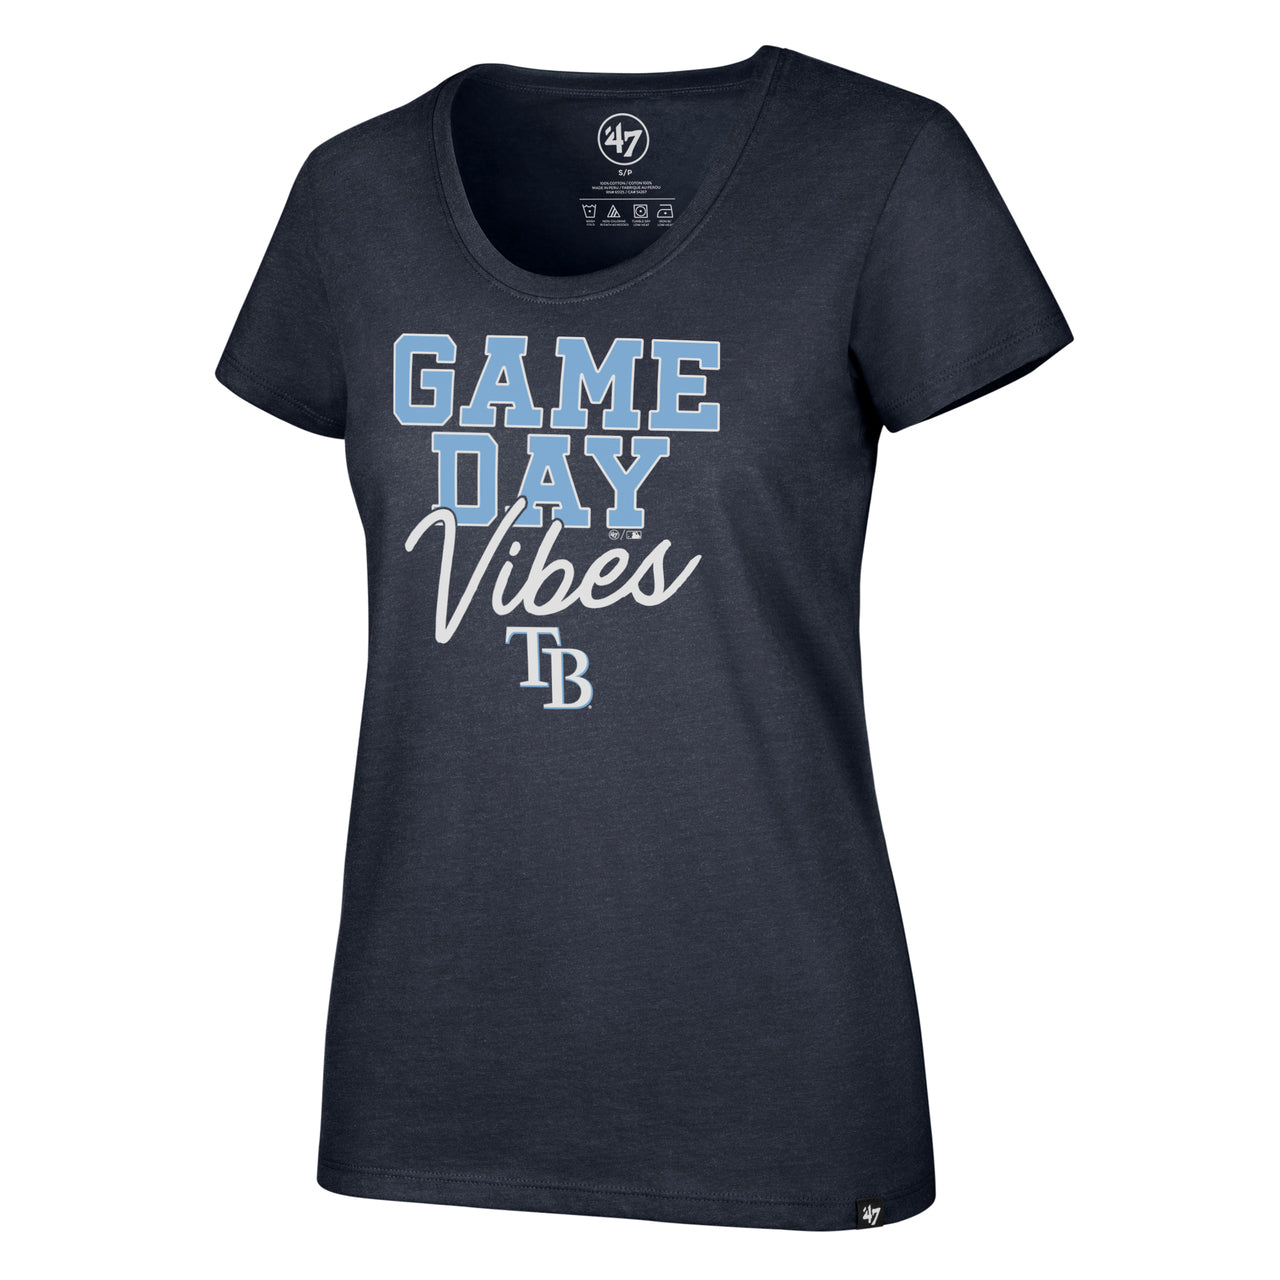 Women's Tampa Bay Rays '47 Brand Game Day Vibes Club Tee